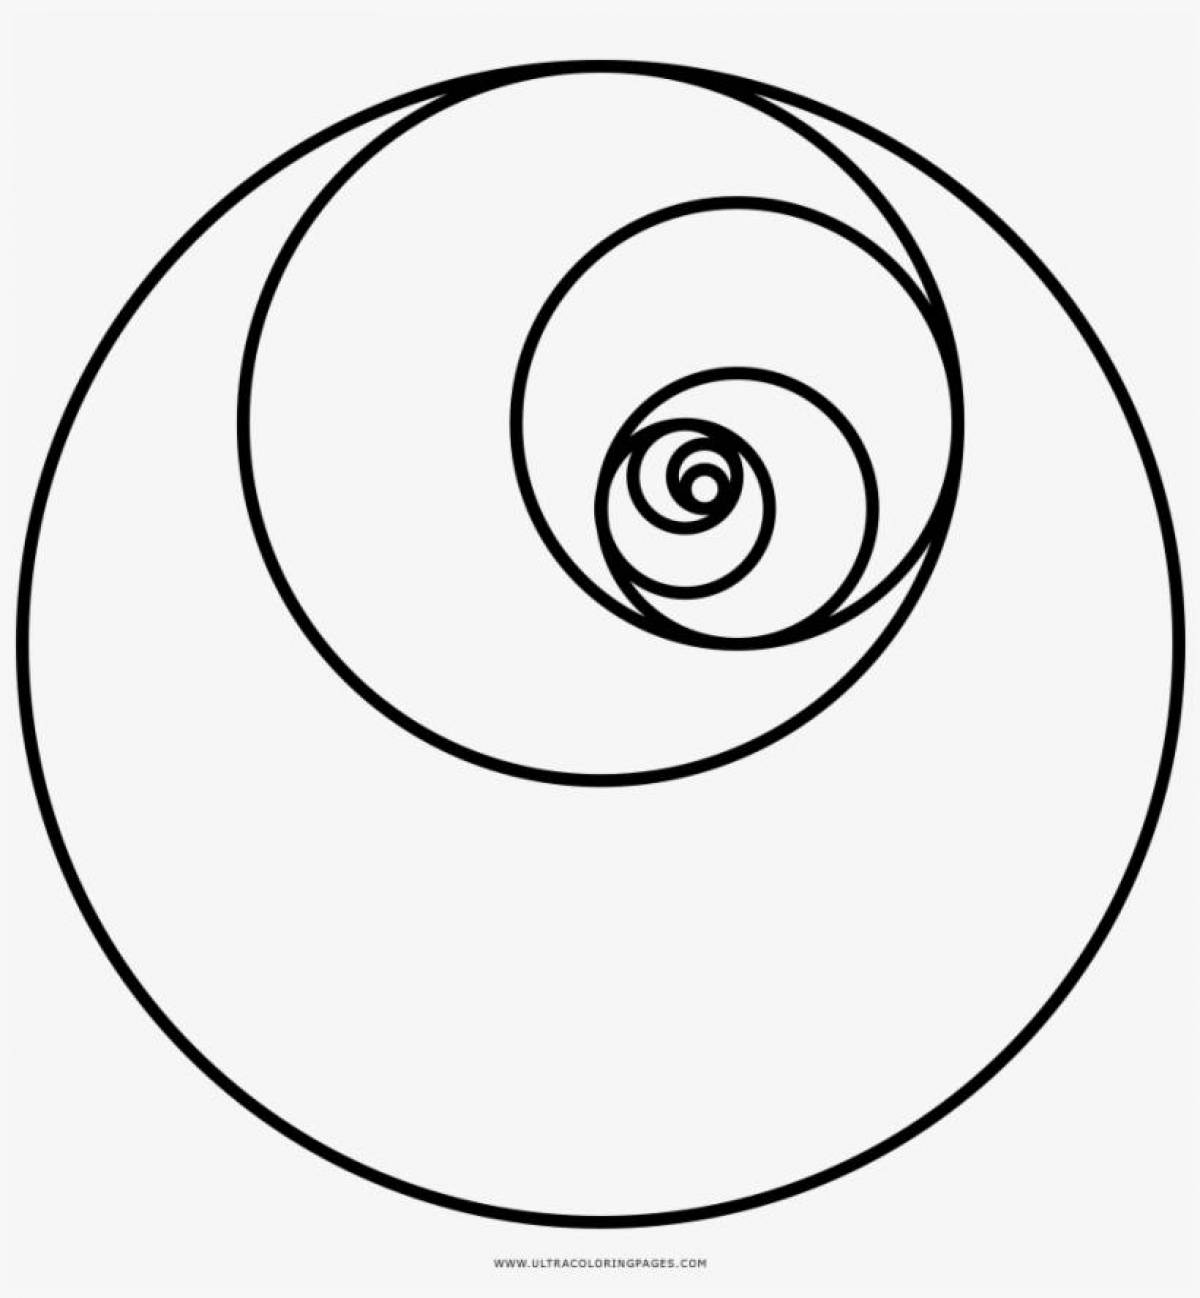 Fascinating spiral create coloring page